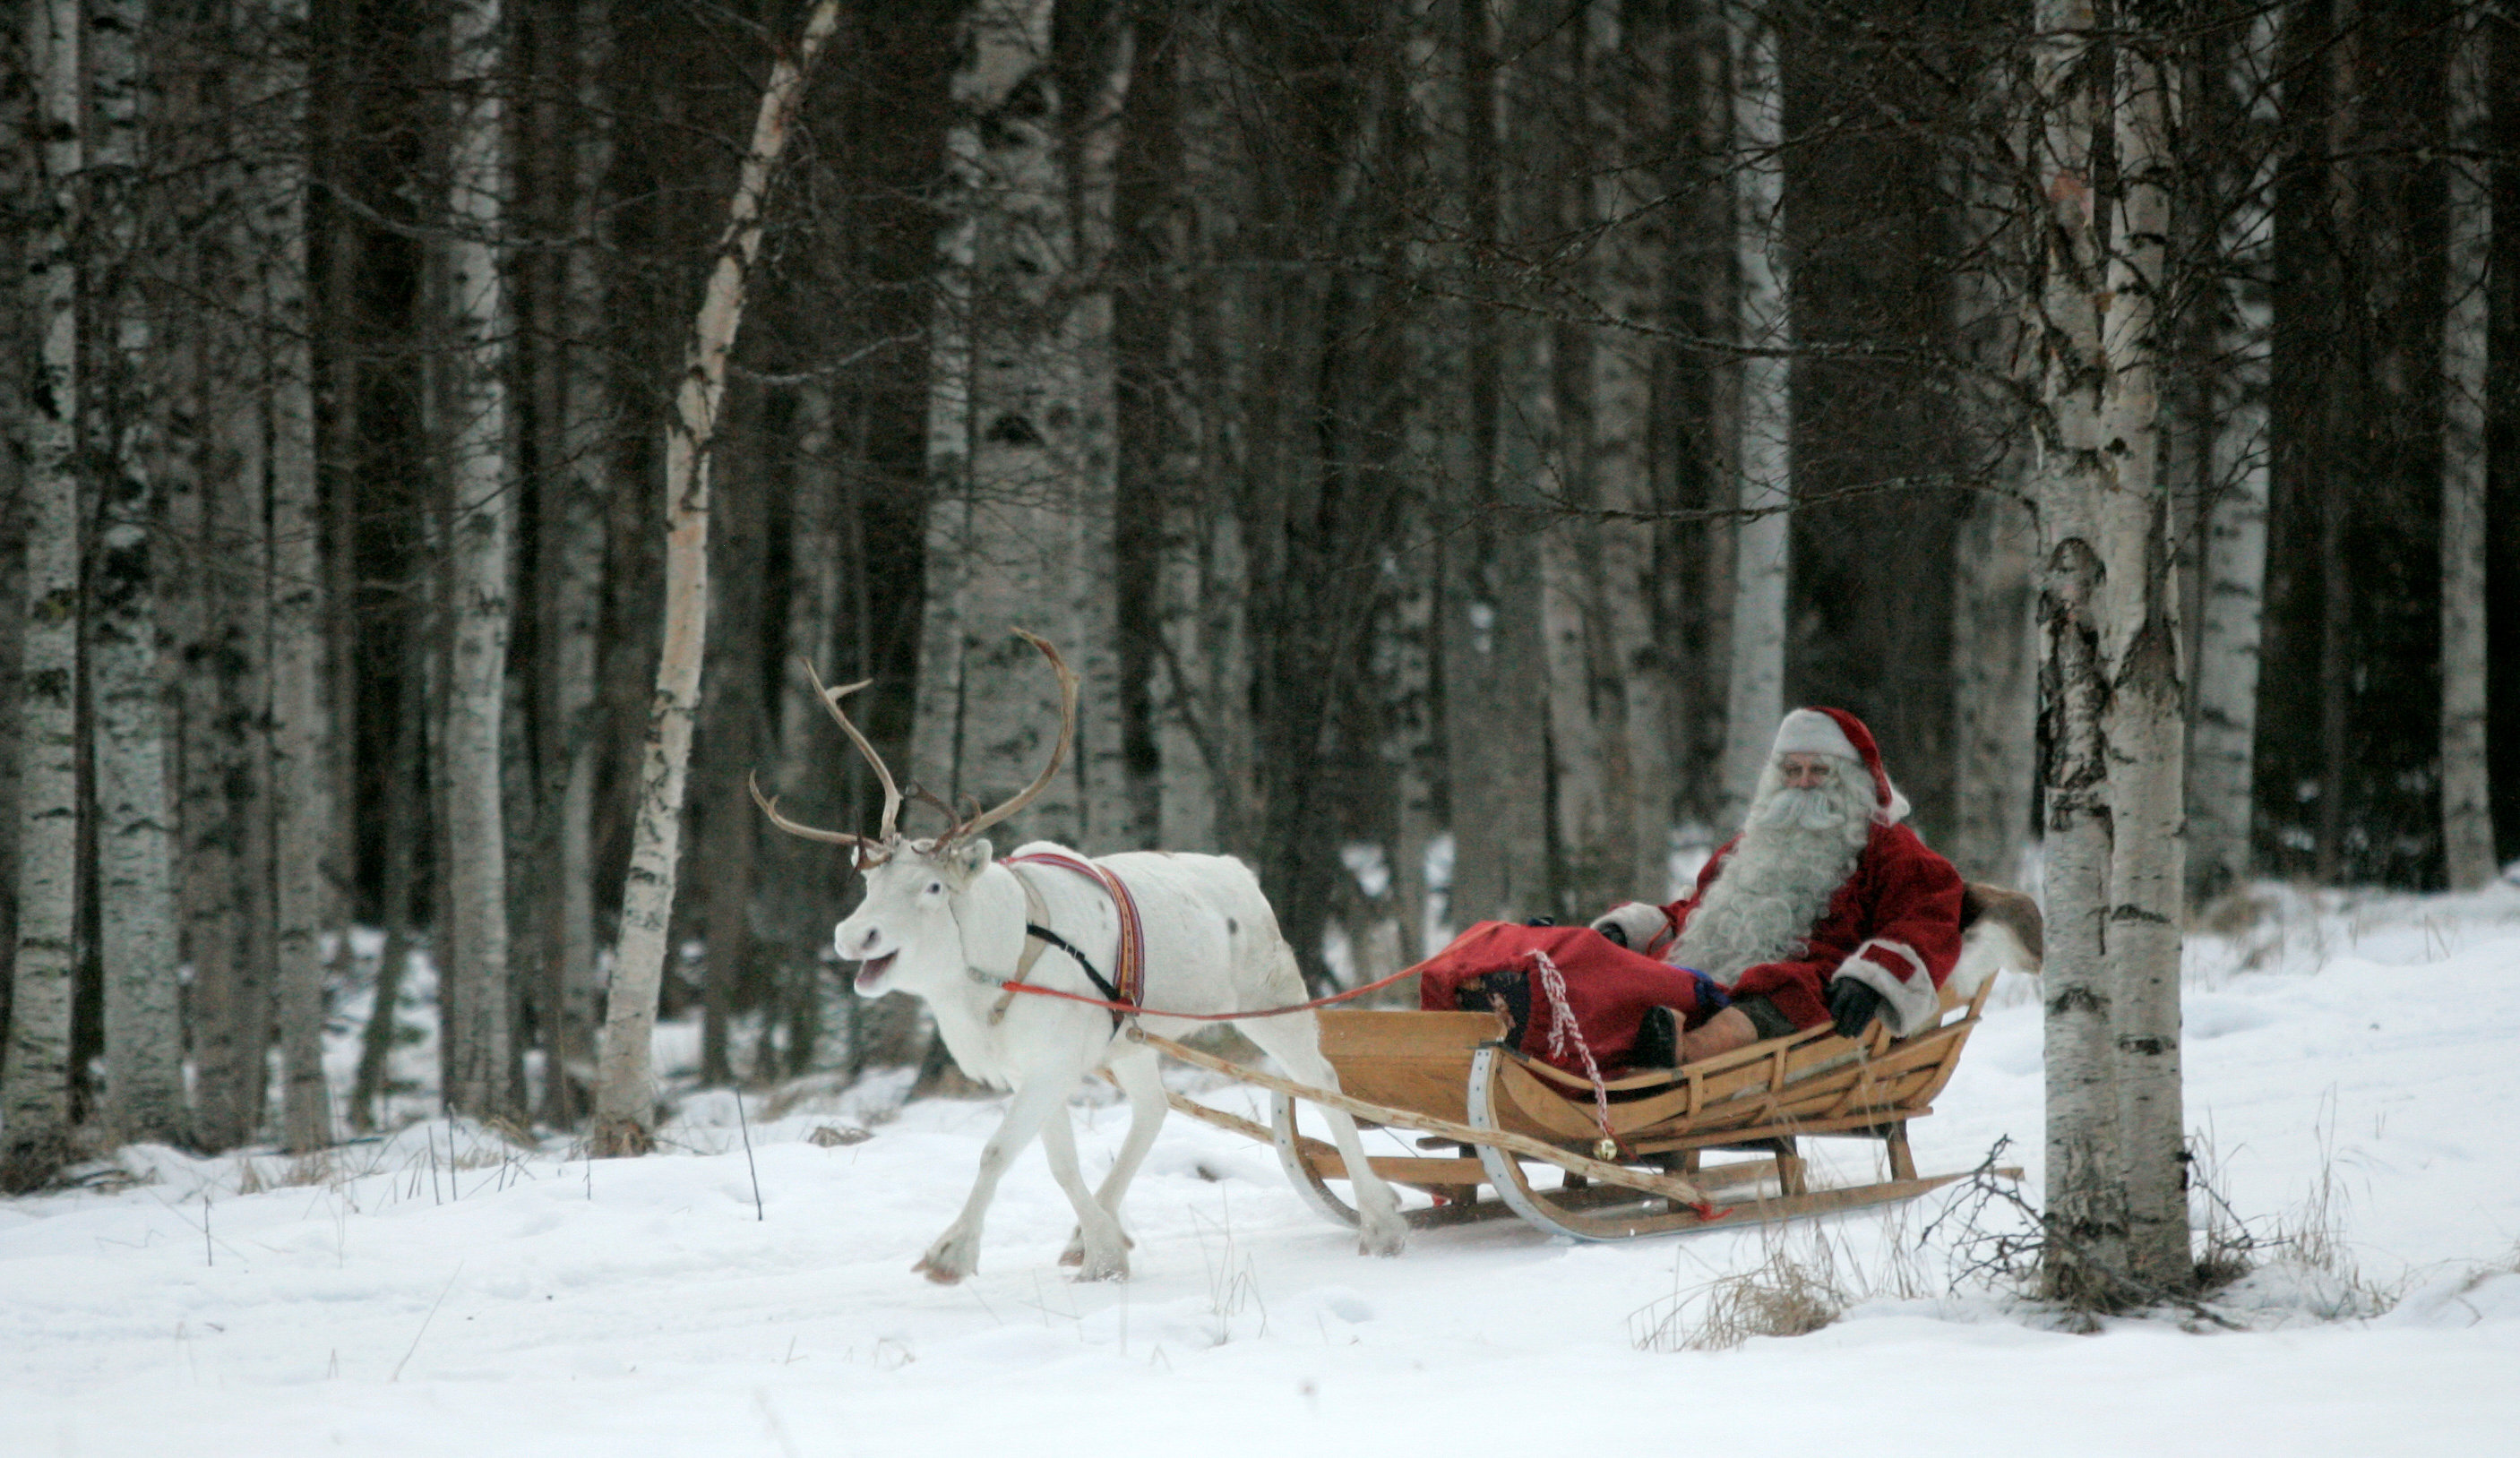 A man dressed as Santa Claus rides his sleigh as he prepares for Christmas on the Arctic Circle in Rovaniemi, northern Finland, December 19, 2007. REUTERS/KACPER PEMPEL/File Photon